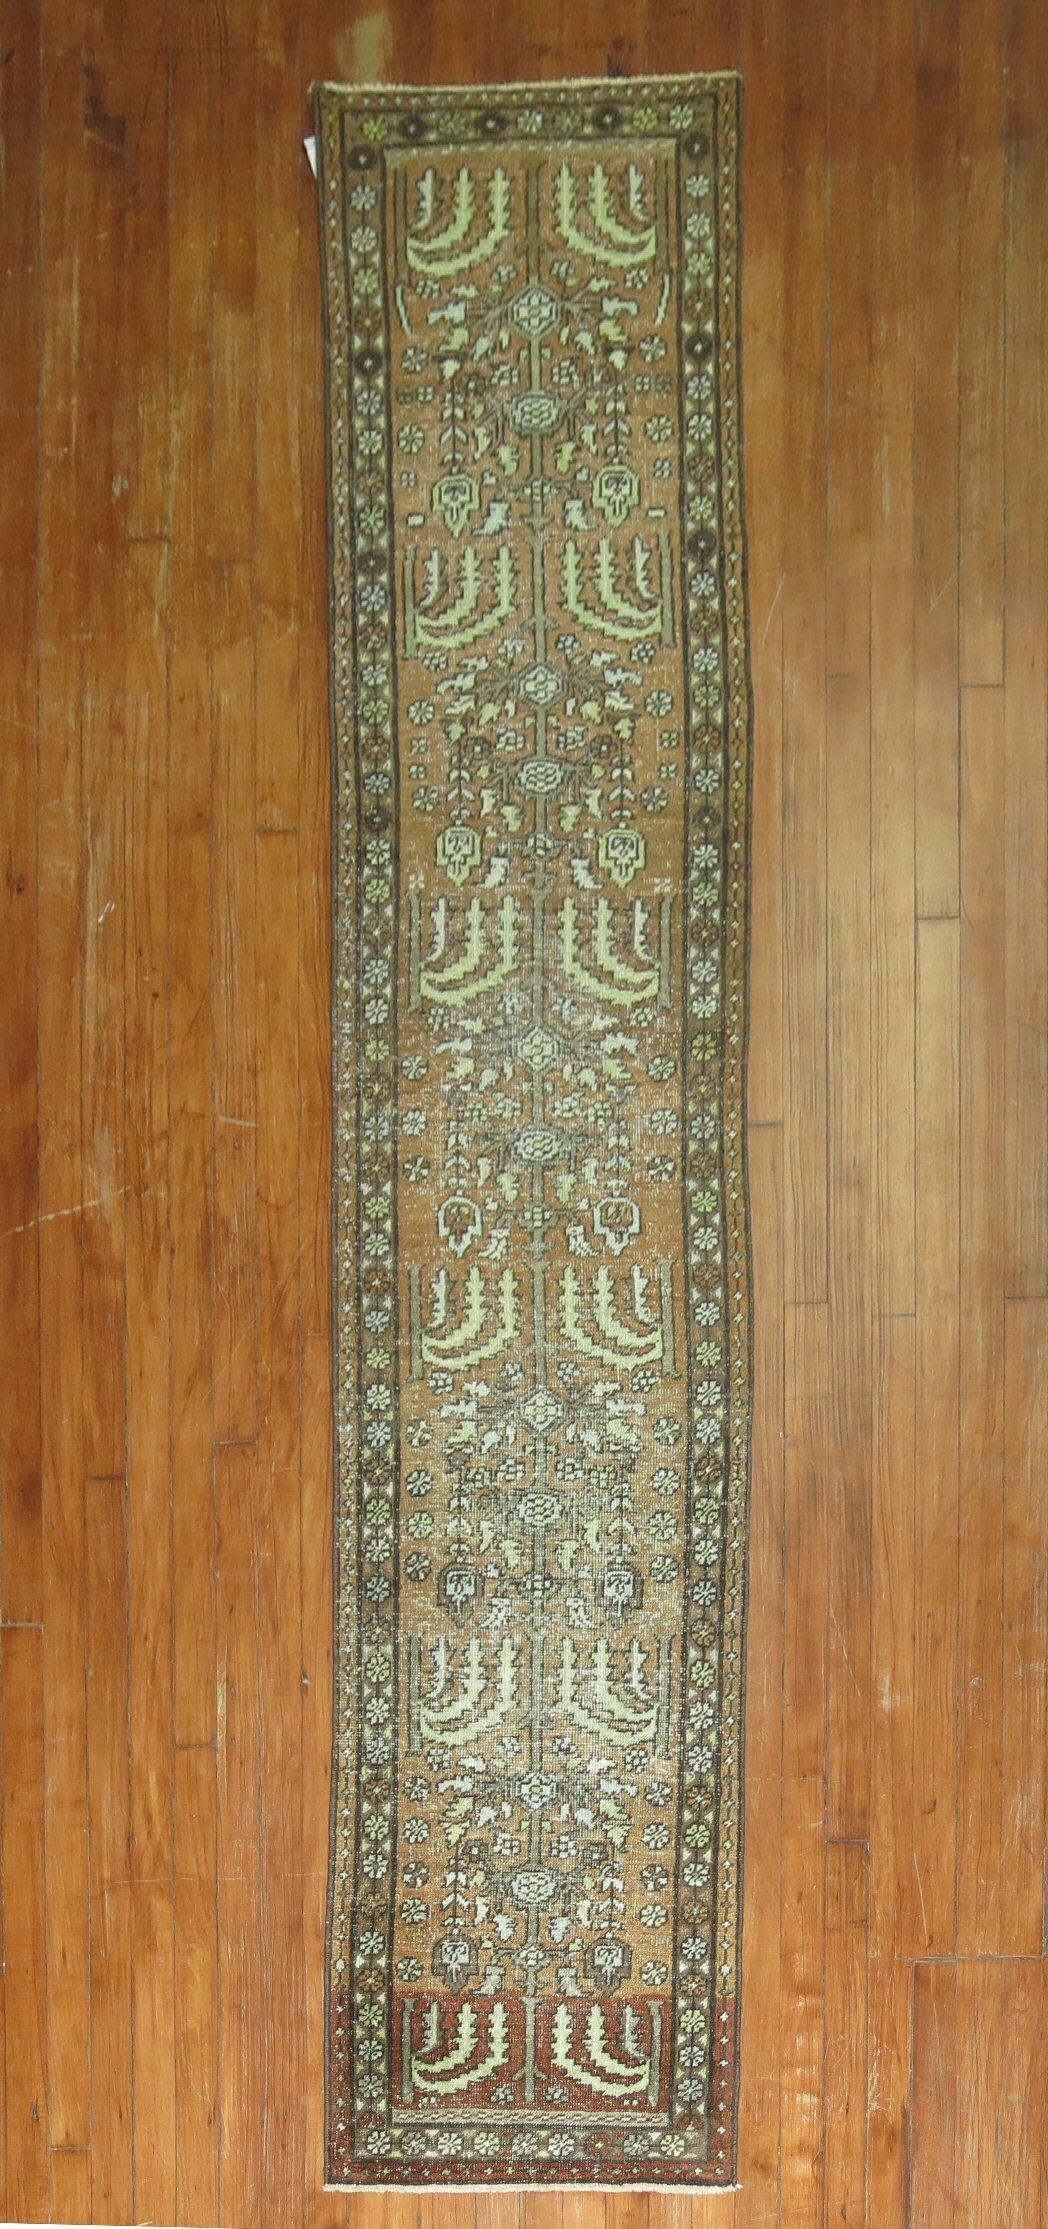 Decorative Persian Heriz one-of-a-kind antique narrow runner from the early 20th century. in brown and green.

Measures: 1'10” x 9'6”.